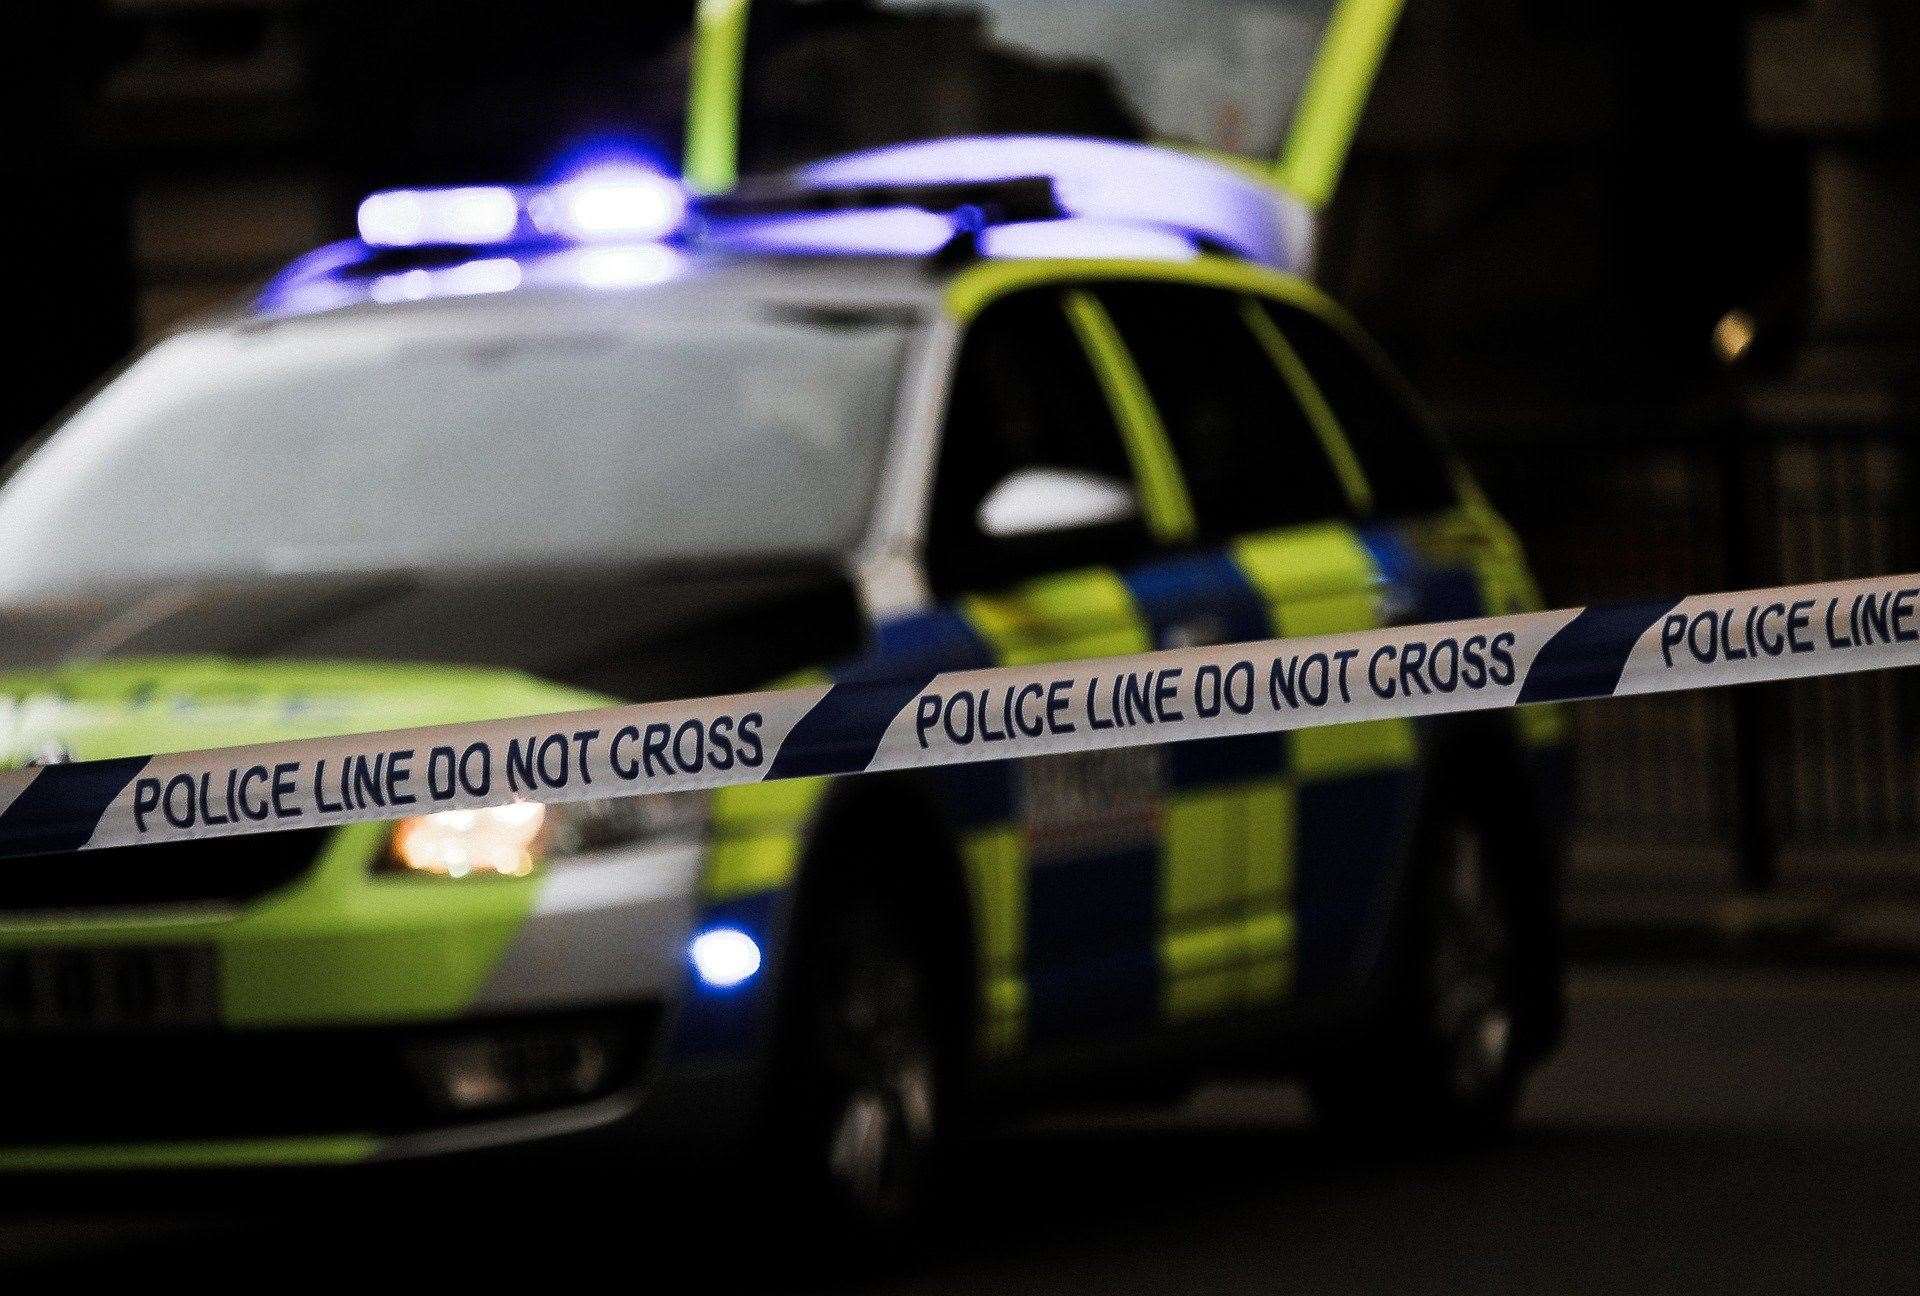 Police have confirmed a man has died